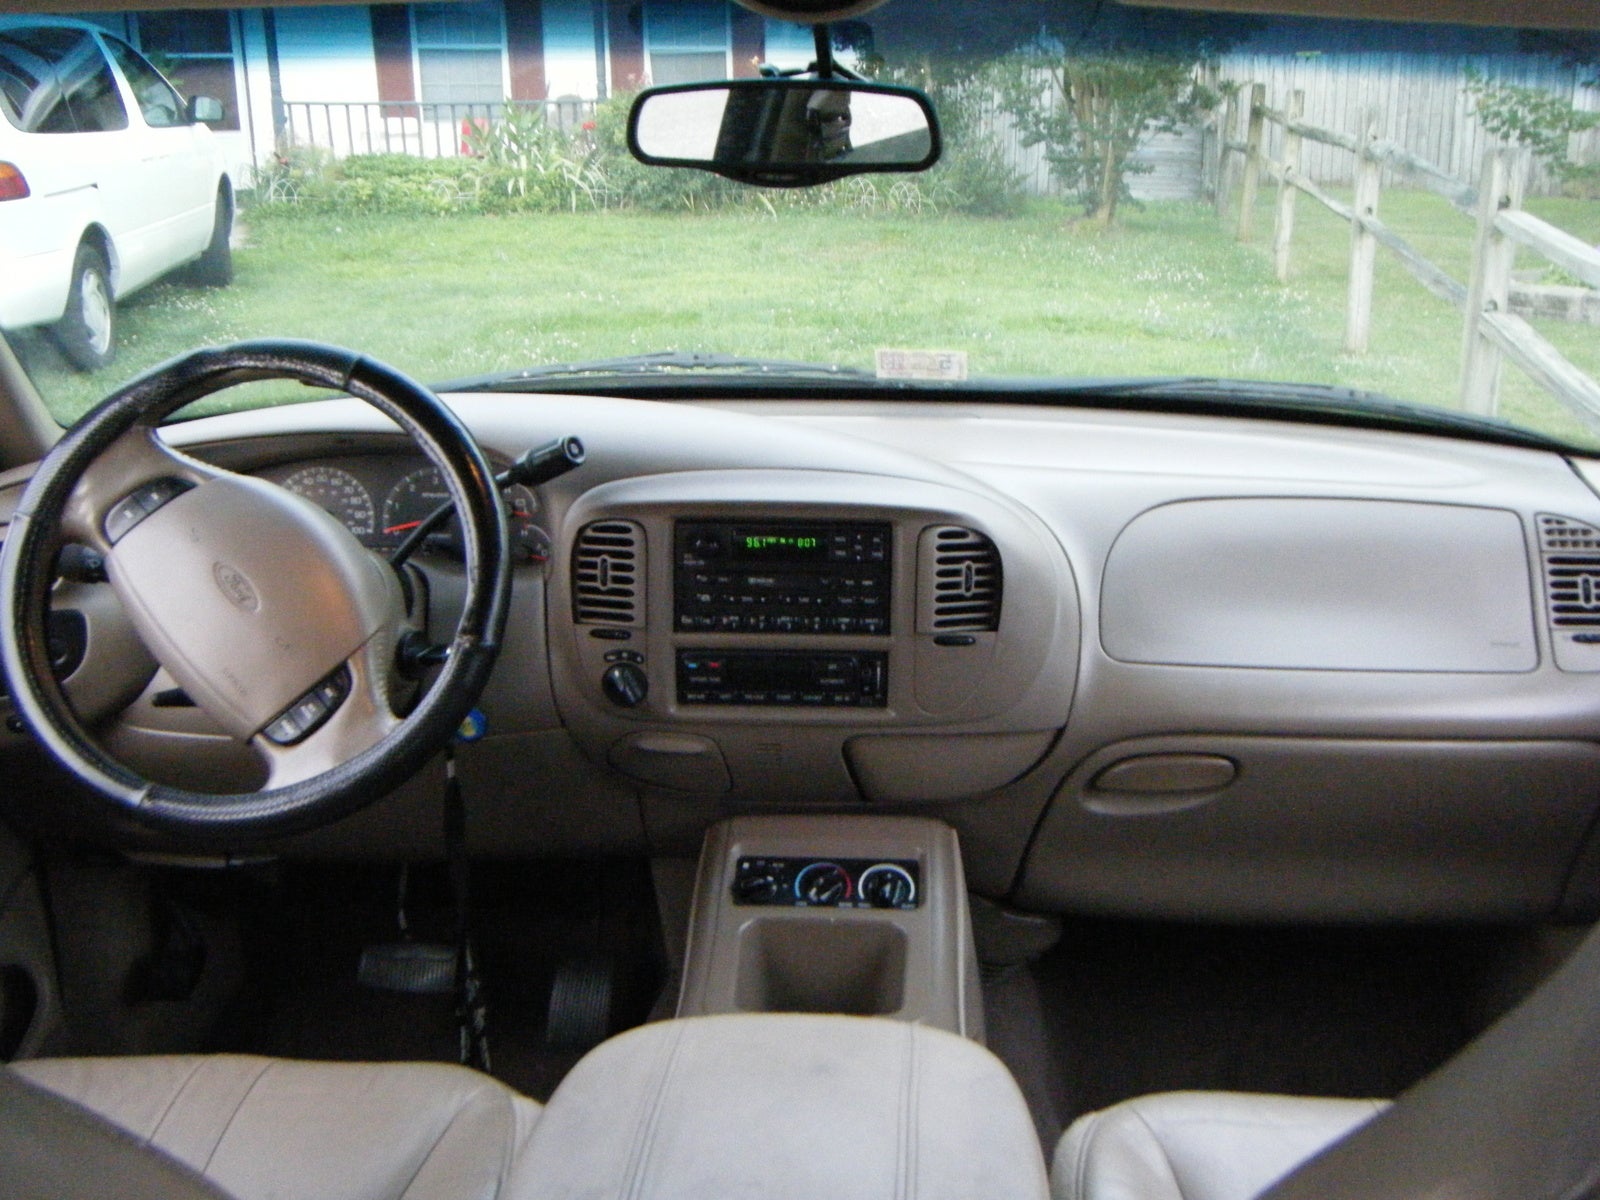 2000 Ford expedition interior photos #7